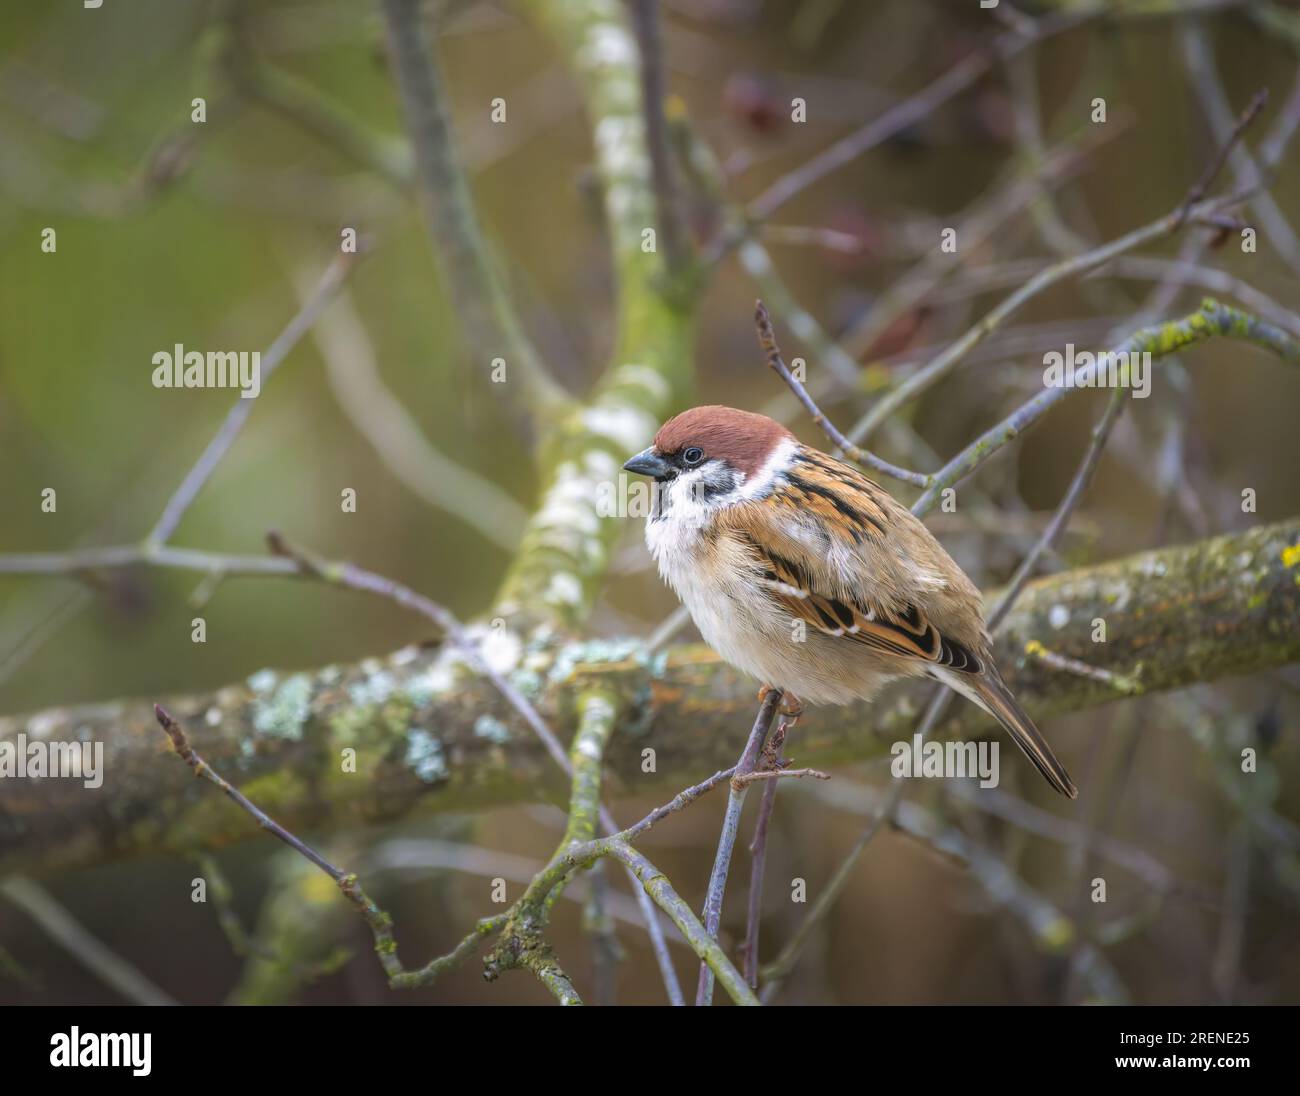 Closeup of a sparrow sitting on the branch of a tree Stock Photo